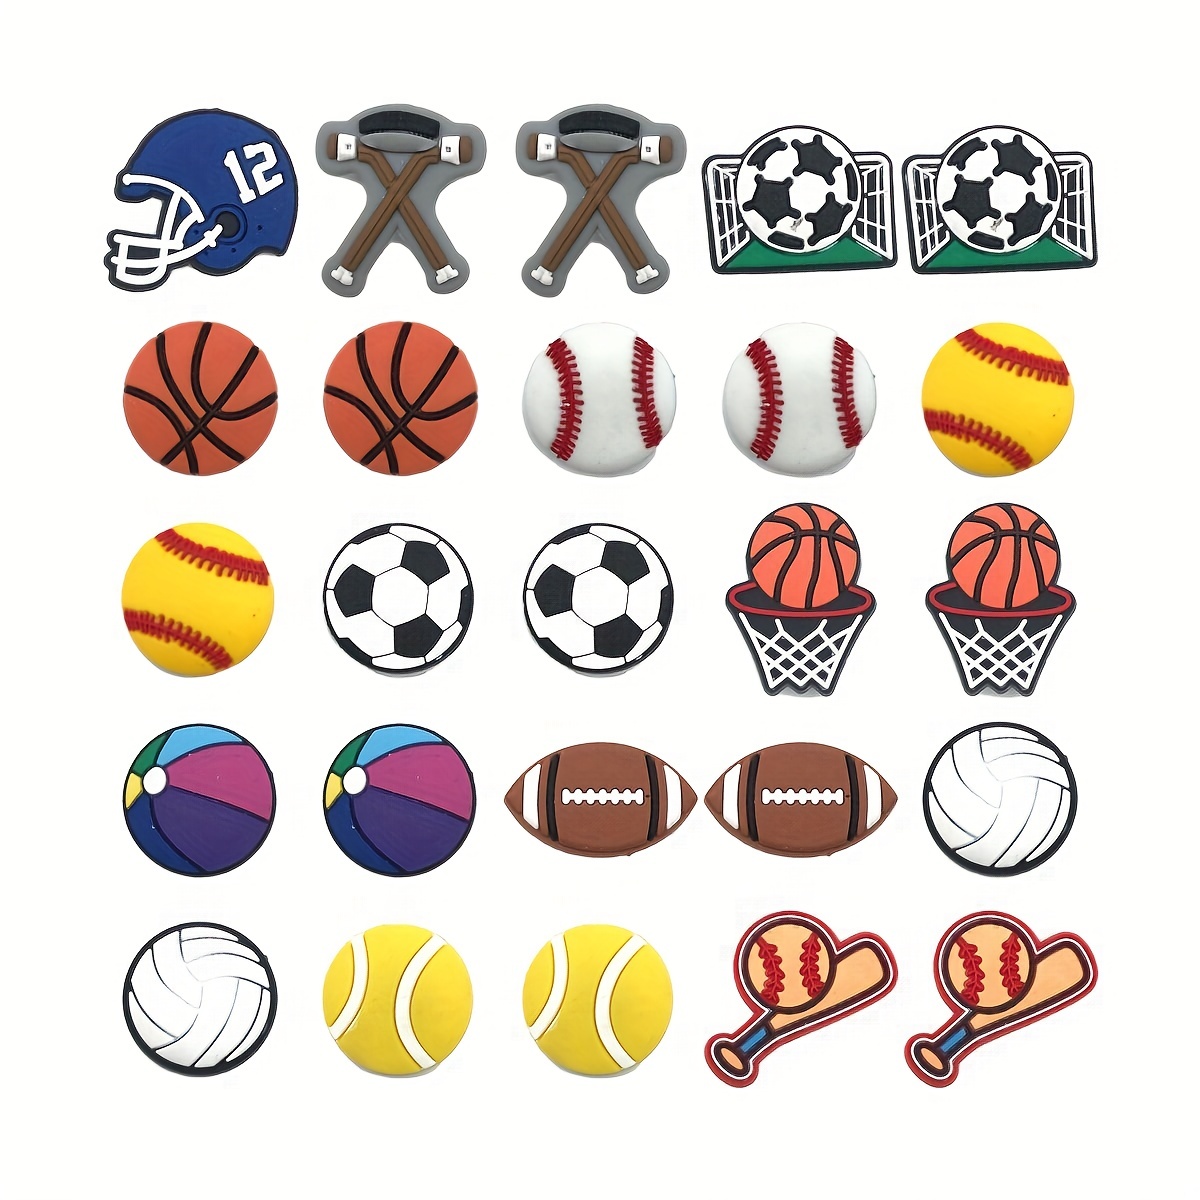  25 50PCS Baseball Shoe Charms for Croc Bubble Slides Clogs  Sandals, Sports Balls Shoe Accessories Decorations for Boys Men Teens  Adults (25) : Clothing, Shoes & Jewelry